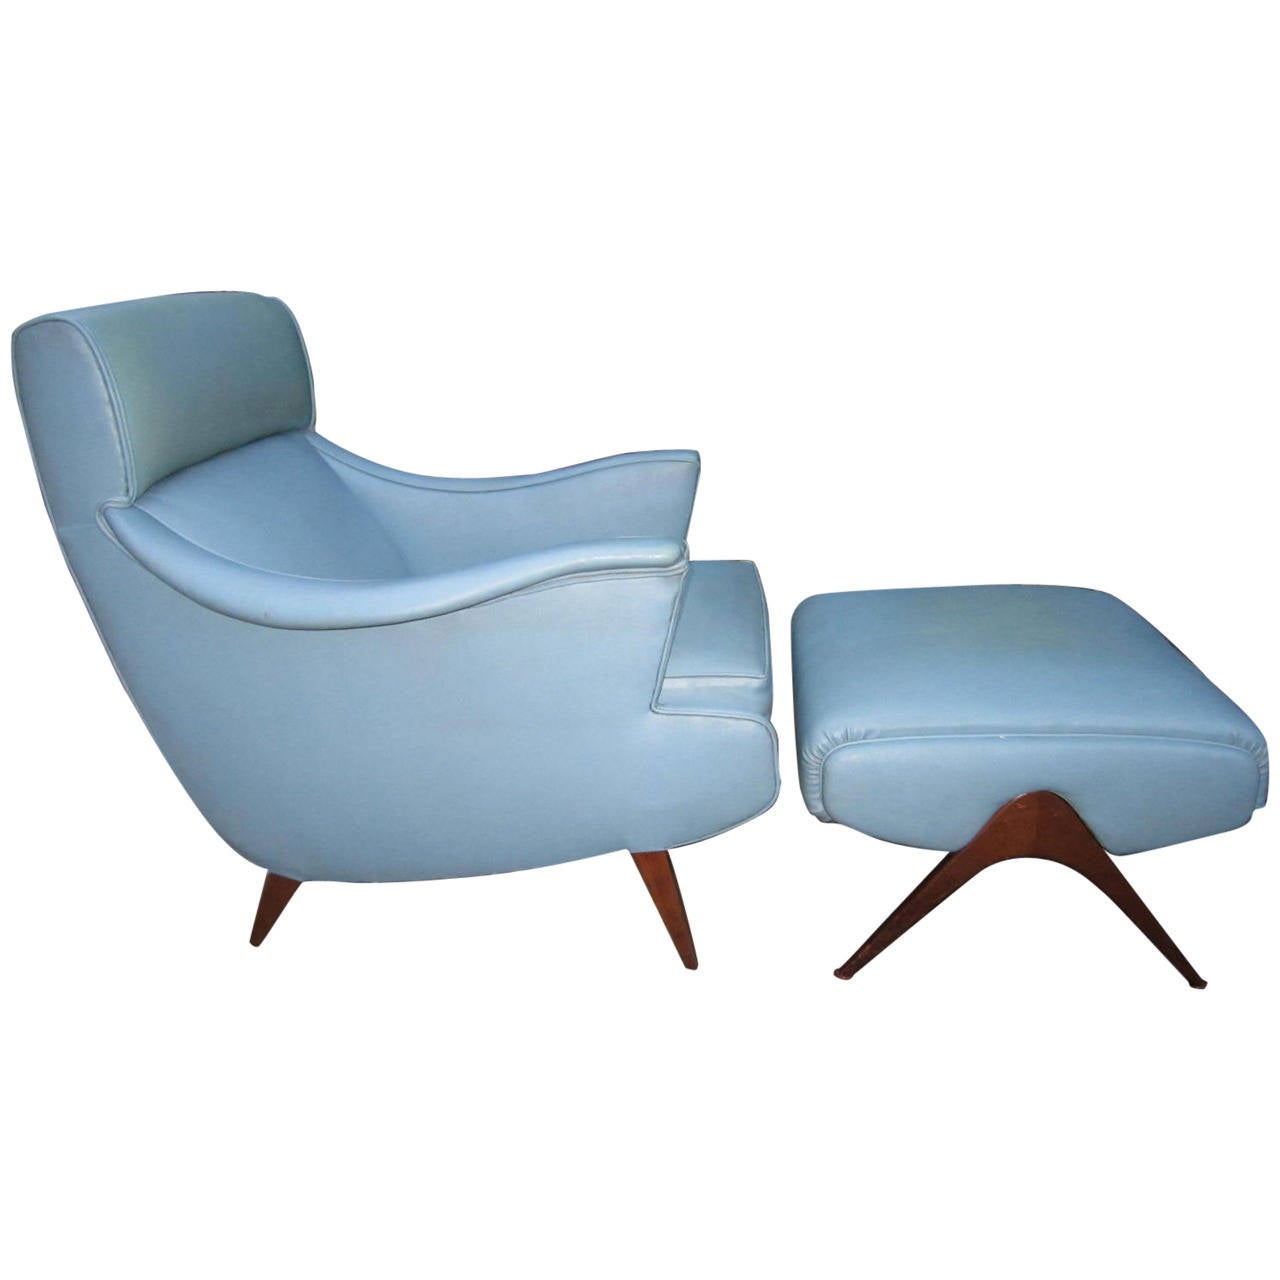 Mid Century Modern Lounge Chair, Mid Century Modern Lounge Chair With Ottoman